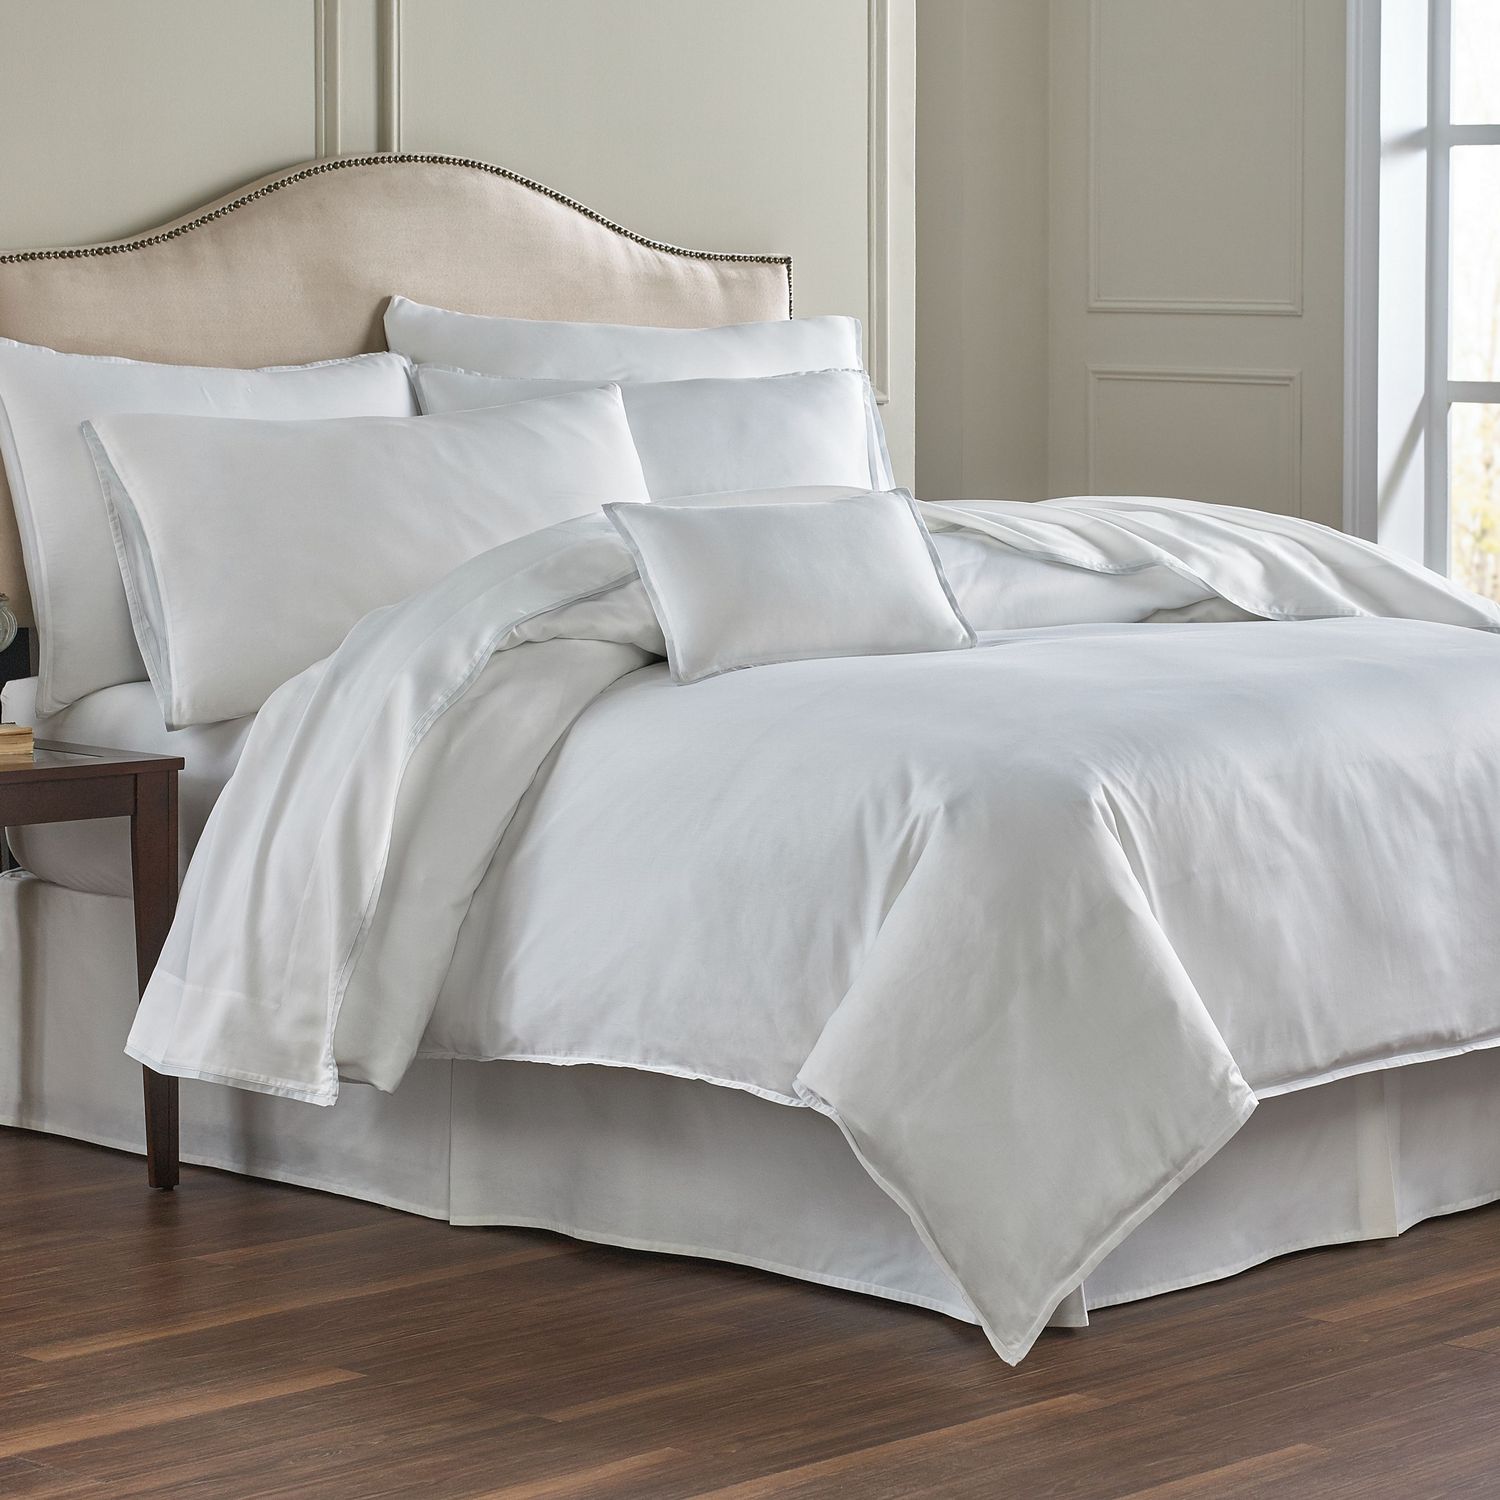 Tl At Home Soho Bedding Collection, Soho Lafayette Duvet Cover Set